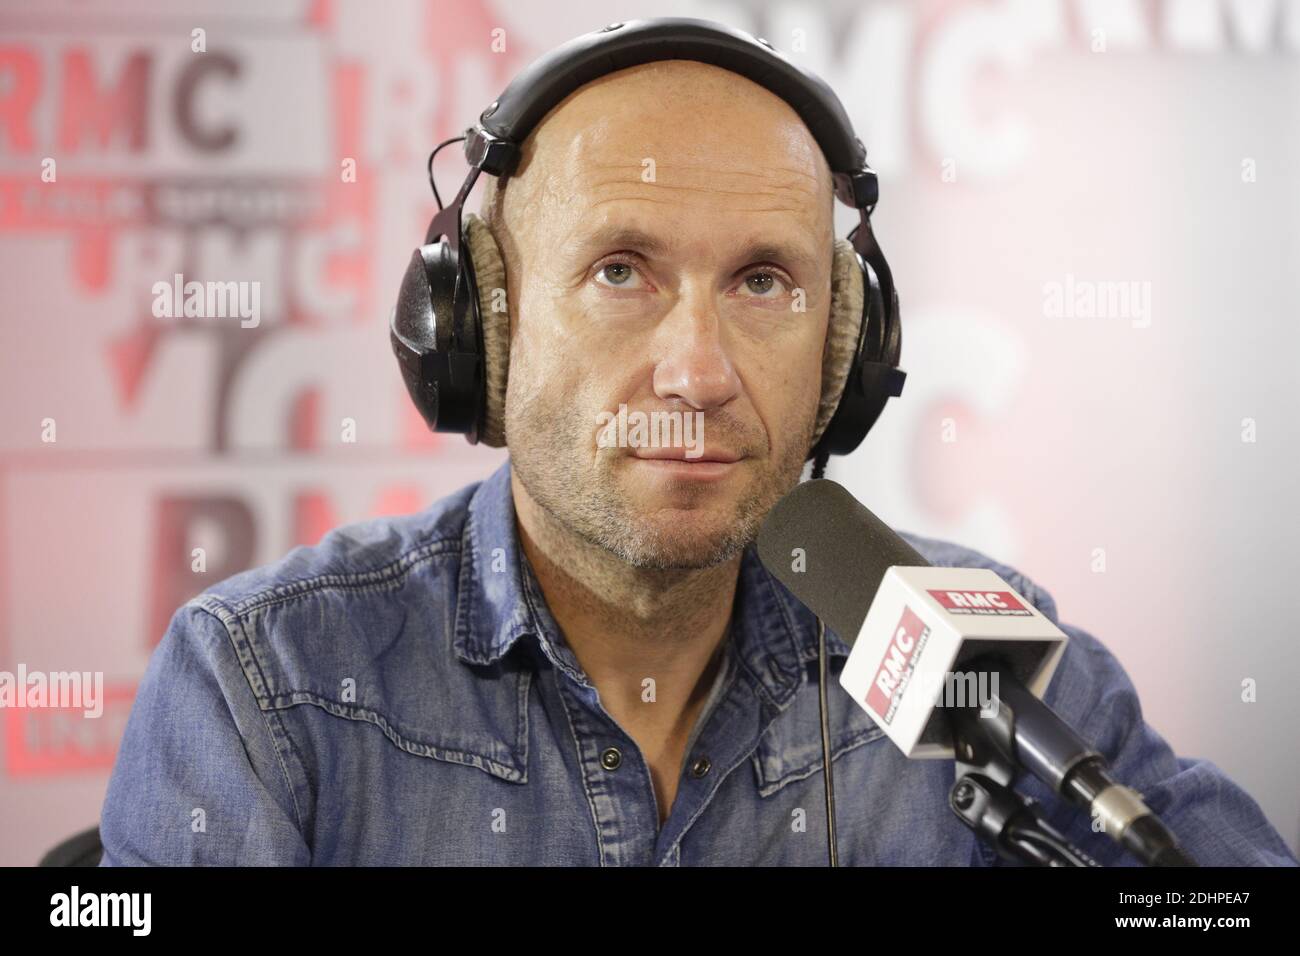 Exclusive - Gilbert Brisbois at the 'L'After Foot' talk show on RMC Radio,  in Paris, France, on February 24, 2016. Photo by Jerome  Domine/ABACAPRESS.COM Stock Photo - Alamy